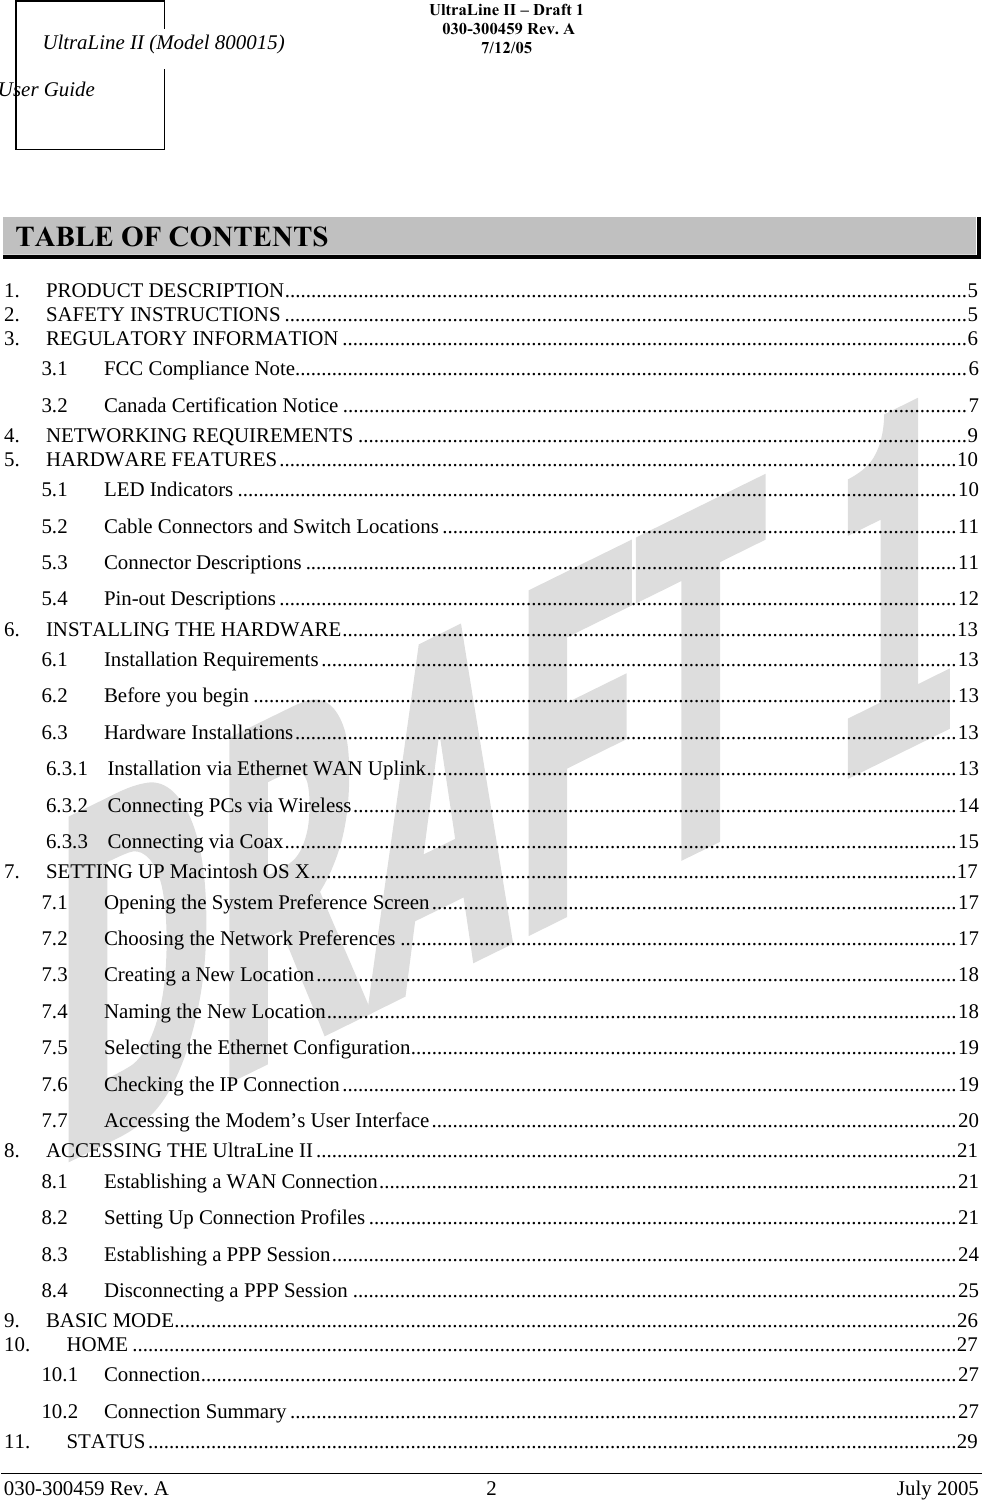    UltraLine II – Draft 1   030-300459 Rev. A 7/12/05     030-300459 Rev. A  2  July 2005    User Guide UltraLine II (Model 800015) TABLE OF CONTENTS  1. PRODUCT DESCRIPTION..................................................................................................................................5 2. SAFETY INSTRUCTIONS ..................................................................................................................................5 3. REGULATORY INFORMATION .......................................................................................................................6 3.1 FCC Compliance Note................................................................................................................................6 3.2 Canada Certification Notice .......................................................................................................................7 4. NETWORKING REQUIREMENTS ....................................................................................................................9 5. HARDWARE FEATURES.................................................................................................................................10 5.1 LED Indicators .........................................................................................................................................10 5.2 Cable Connectors and Switch Locations ..................................................................................................11 5.3 Connector Descriptions ............................................................................................................................11 5.4 Pin-out Descriptions .................................................................................................................................12 6. INSTALLING THE HARDWARE.....................................................................................................................13 6.1 Installation Requirements.........................................................................................................................13 6.2 Before you begin ......................................................................................................................................13 6.3 Hardware Installations..............................................................................................................................13 6.3.1 Installation via Ethernet WAN Uplink.....................................................................................................13 6.3.2 Connecting PCs via Wireless...................................................................................................................14 6.3.3 Connecting via Coax................................................................................................................................15 7. SETTING UP Macintosh OS X...........................................................................................................................17 7.1 Opening the System Preference Screen....................................................................................................17 7.2 Choosing the Network Preferences ..........................................................................................................17 7.3 Creating a New Location..........................................................................................................................18 7.4 Naming the New Location........................................................................................................................18 7.5 Selecting the Ethernet Configuration........................................................................................................19 7.6 Checking the IP Connection.....................................................................................................................19 7.7 Accessing the Modem’s User Interface....................................................................................................20 8. ACCESSING THE UltraLine II..........................................................................................................................21 8.1 Establishing a WAN Connection..............................................................................................................21 8.2 Setting Up Connection Profiles ................................................................................................................21 8.3 Establishing a PPP Session.......................................................................................................................24 8.4 Disconnecting a PPP Session ...................................................................................................................25 9. BASIC MODE.....................................................................................................................................................26 10. HOME .............................................................................................................................................................27 10.1 Connection................................................................................................................................................27 10.2 Connection Summary ...............................................................................................................................27 11. STATUS..........................................................................................................................................................29 